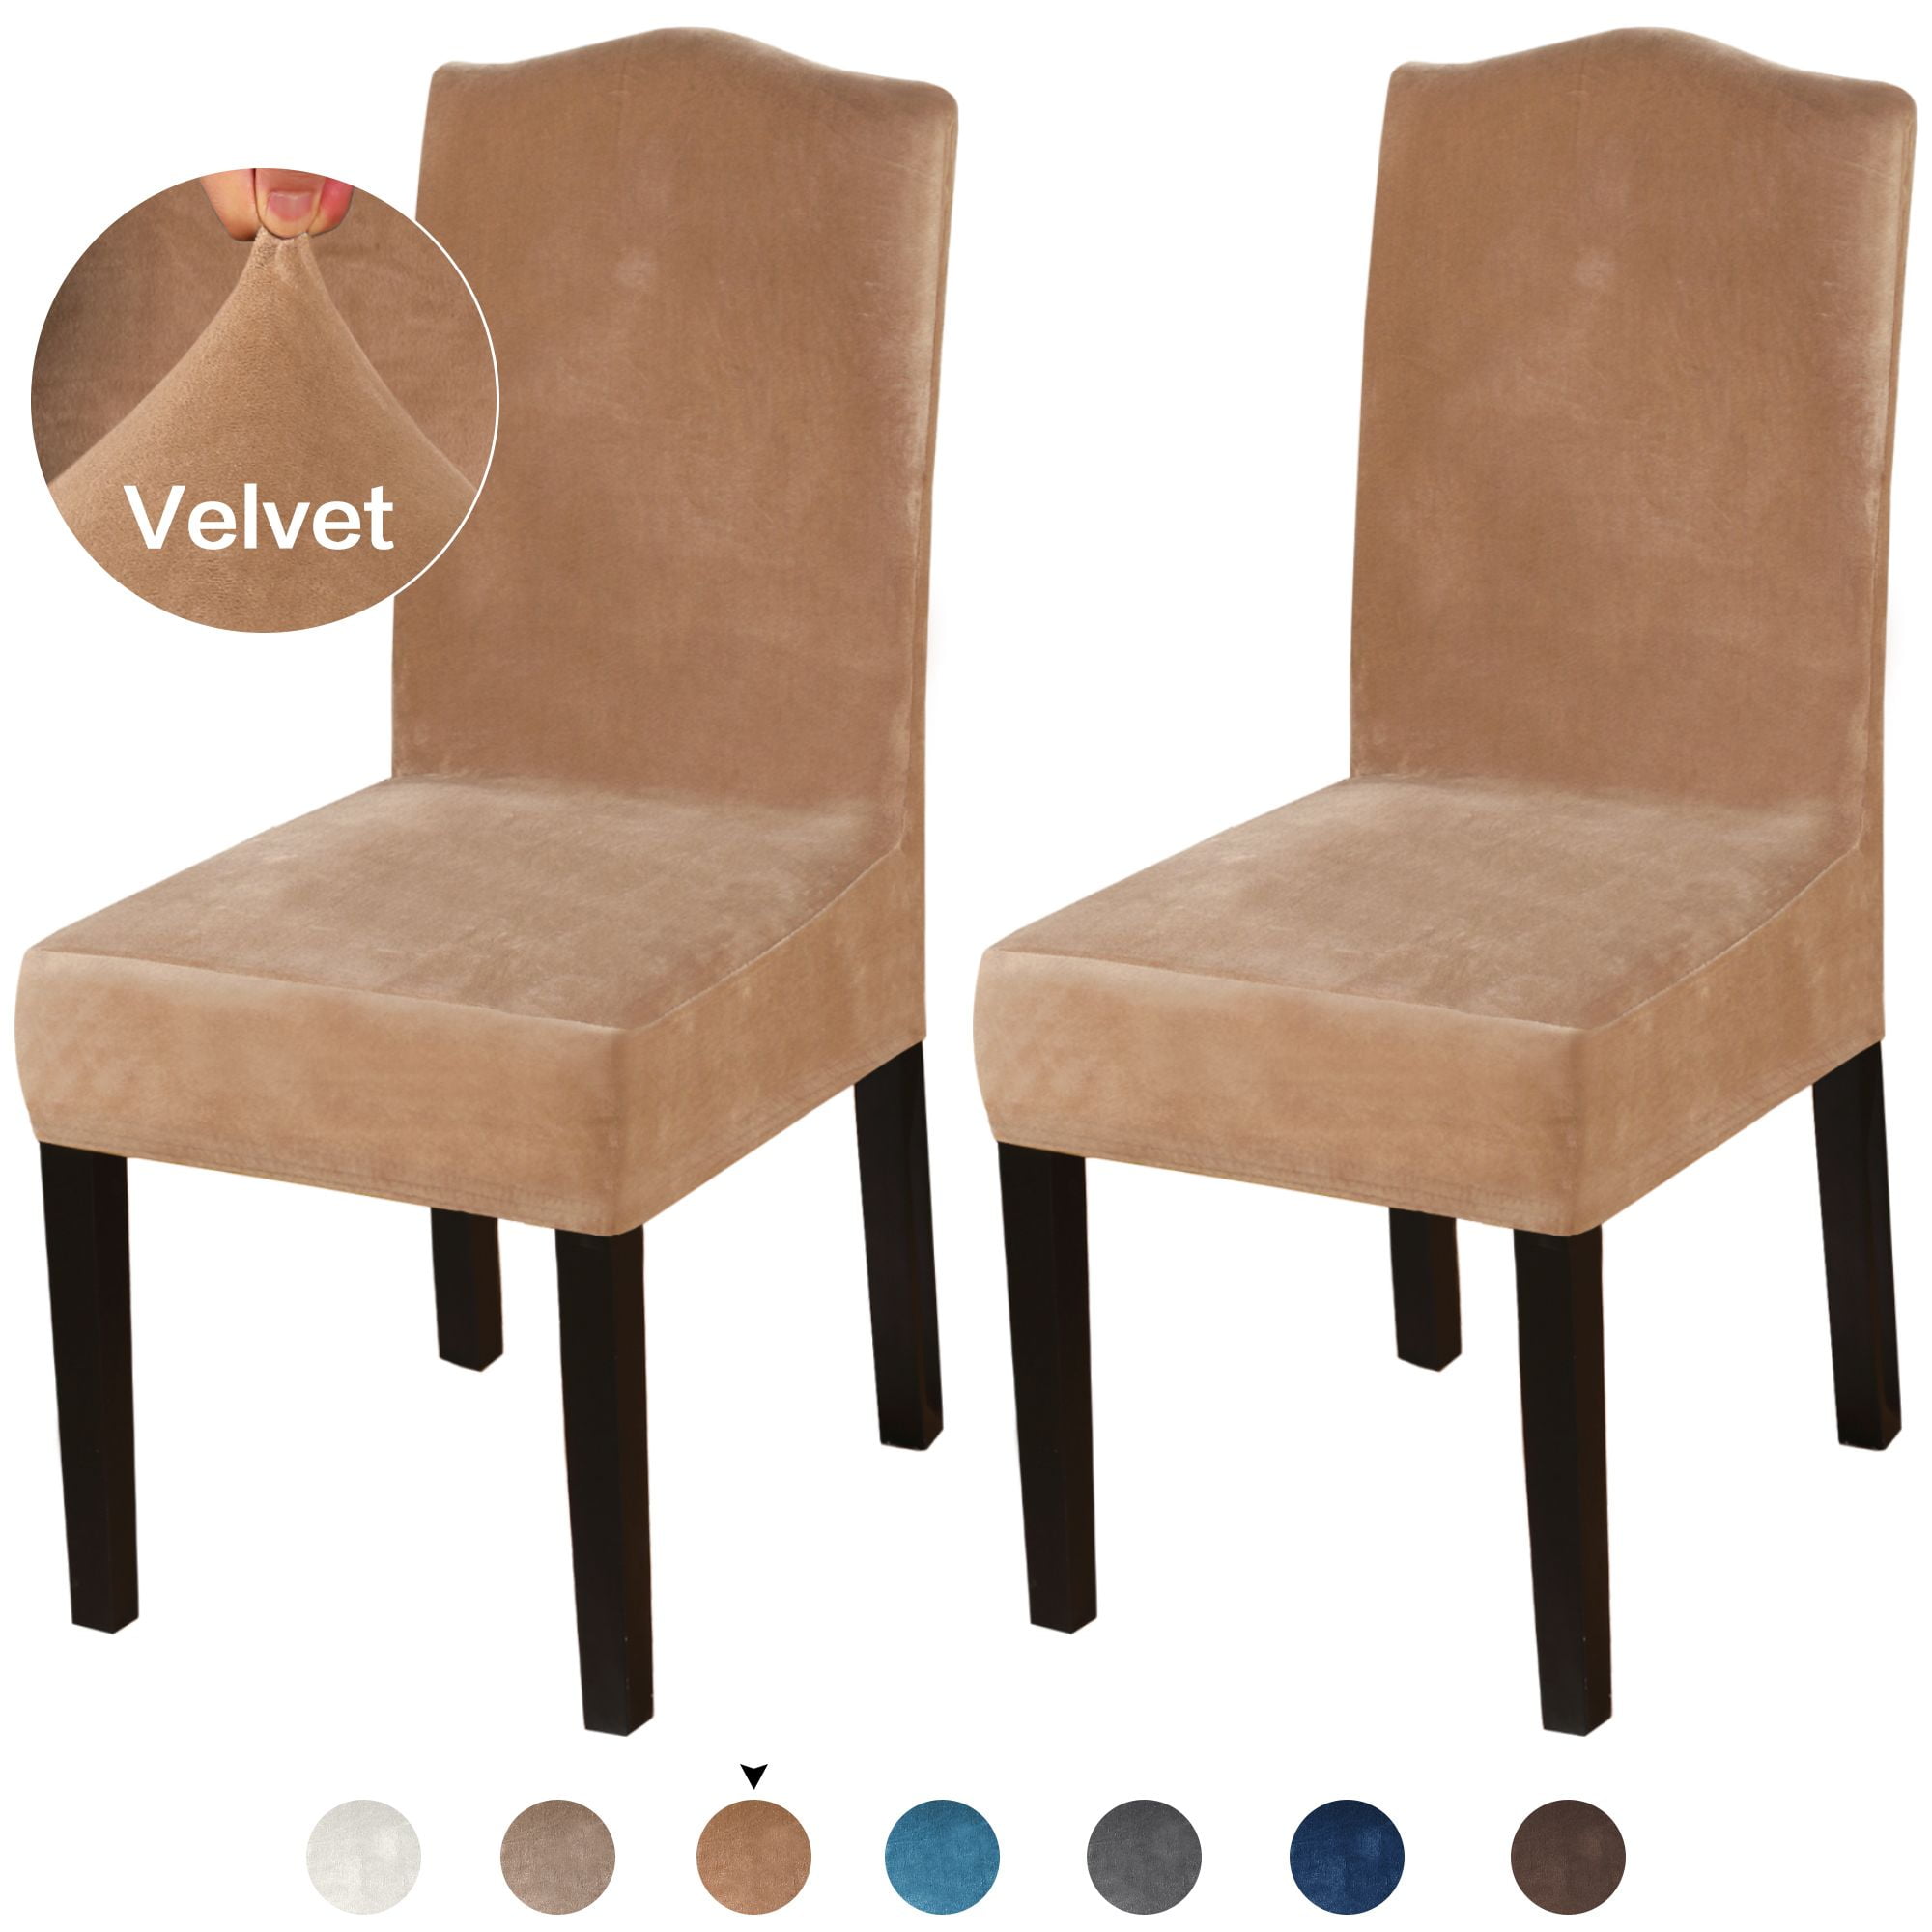 Beige, Set of 2 Premium Stretch DINING CHAIR Slipcovers Covers Thick Plush Knitted Fabric Chair Covers Seat Dining Room Kitchen Furniture Protector Easy Fit Elastic Spandex Removable Washable